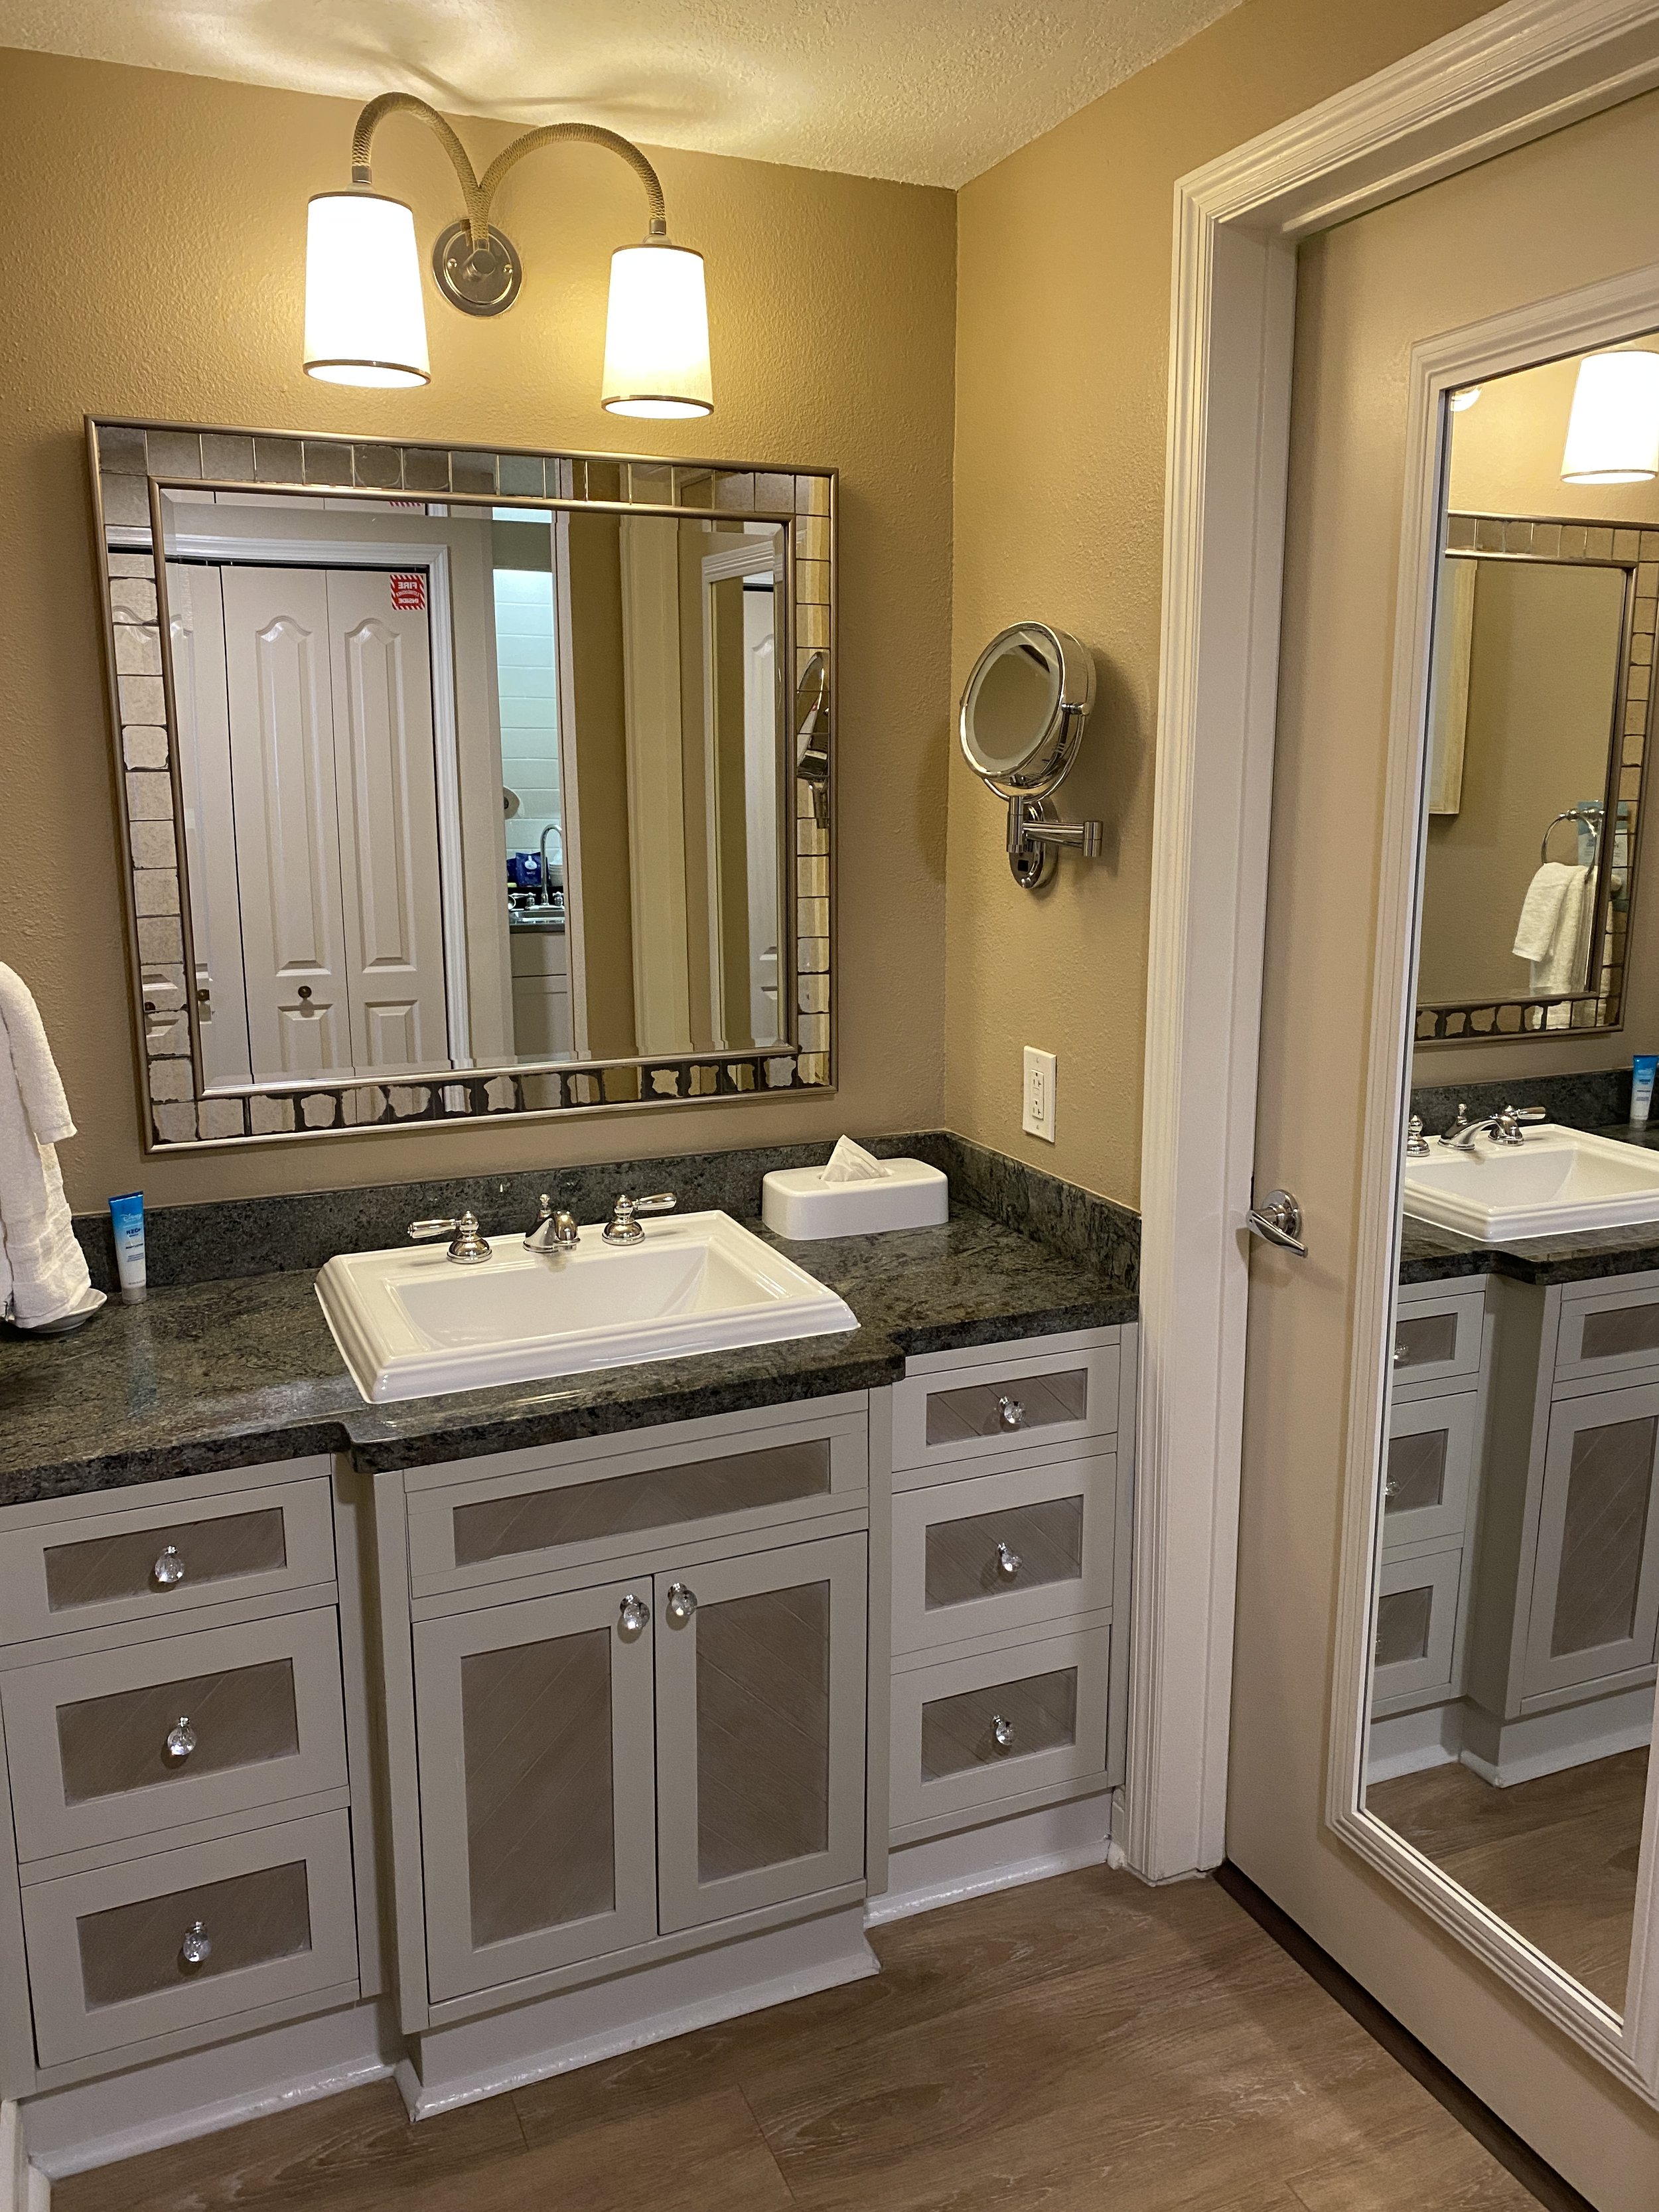  Single sink vanity with a spacious water closet and bathtub and shower.  